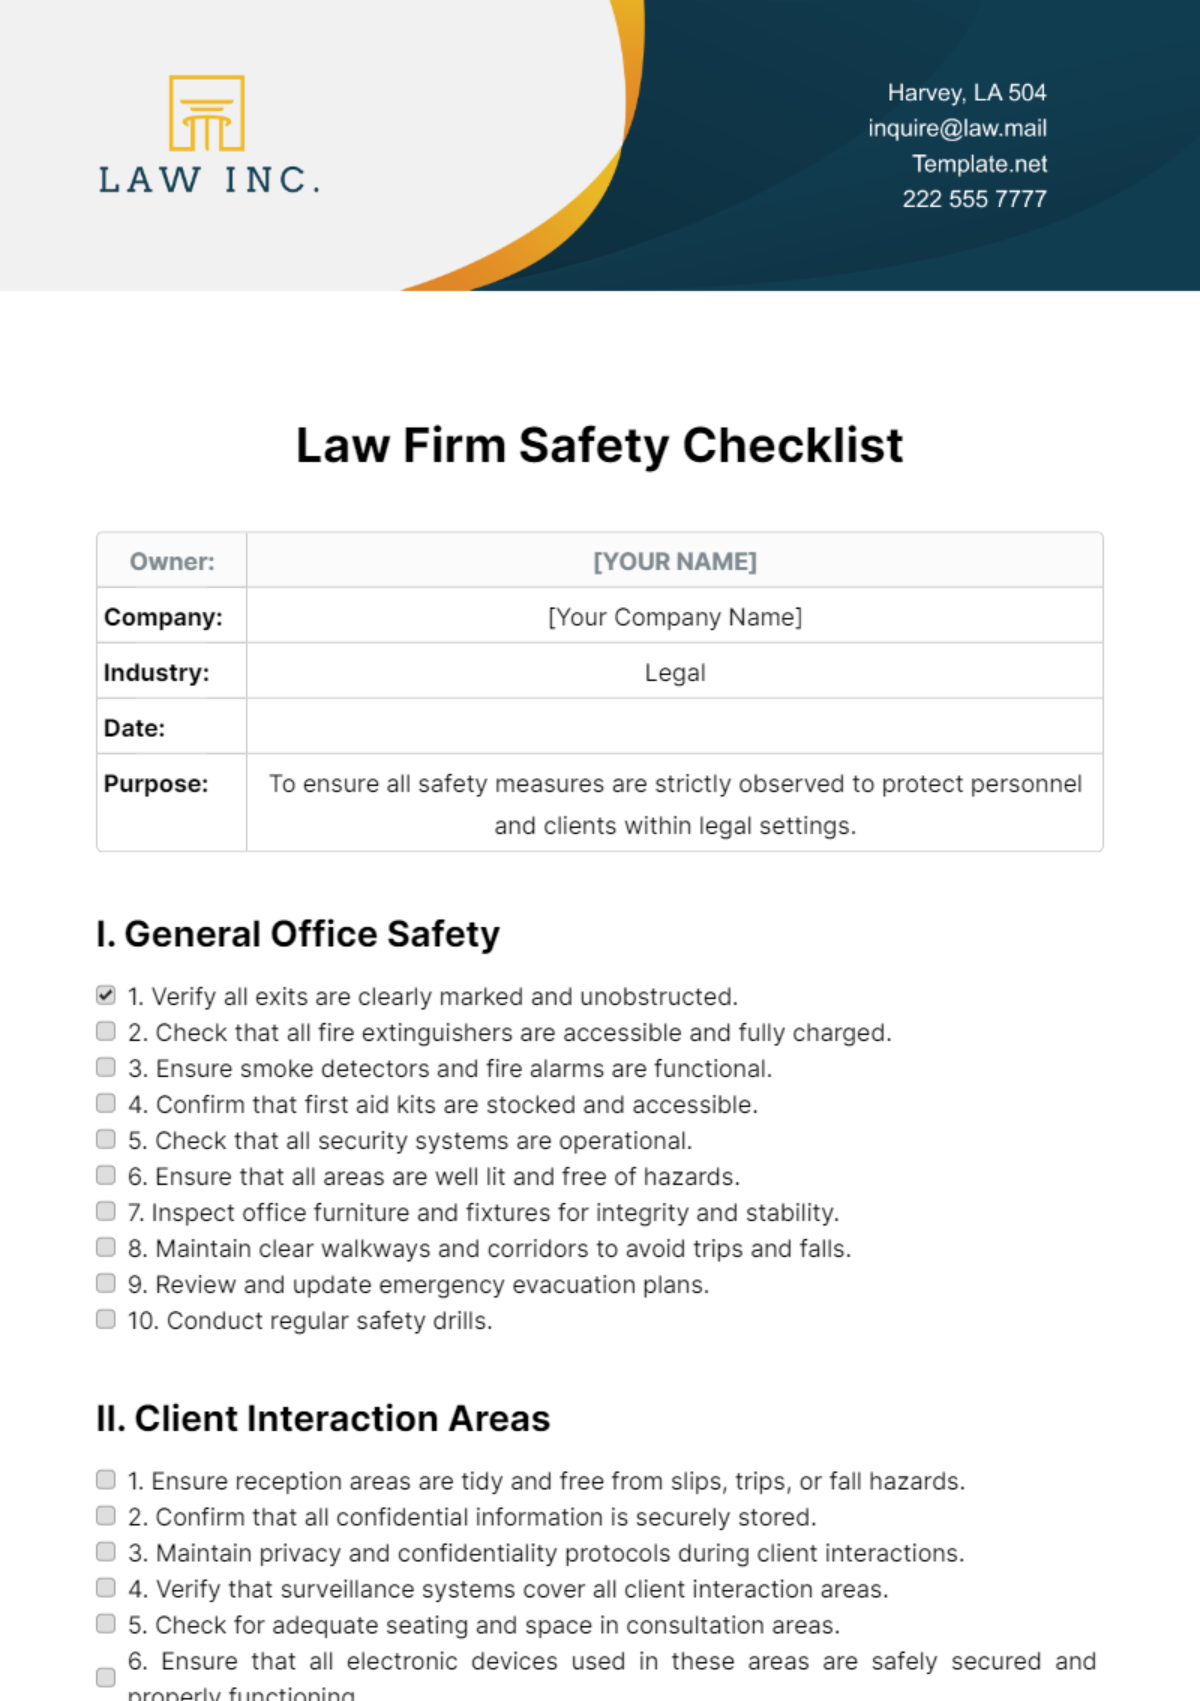 Law Firm Safety Checklist Template